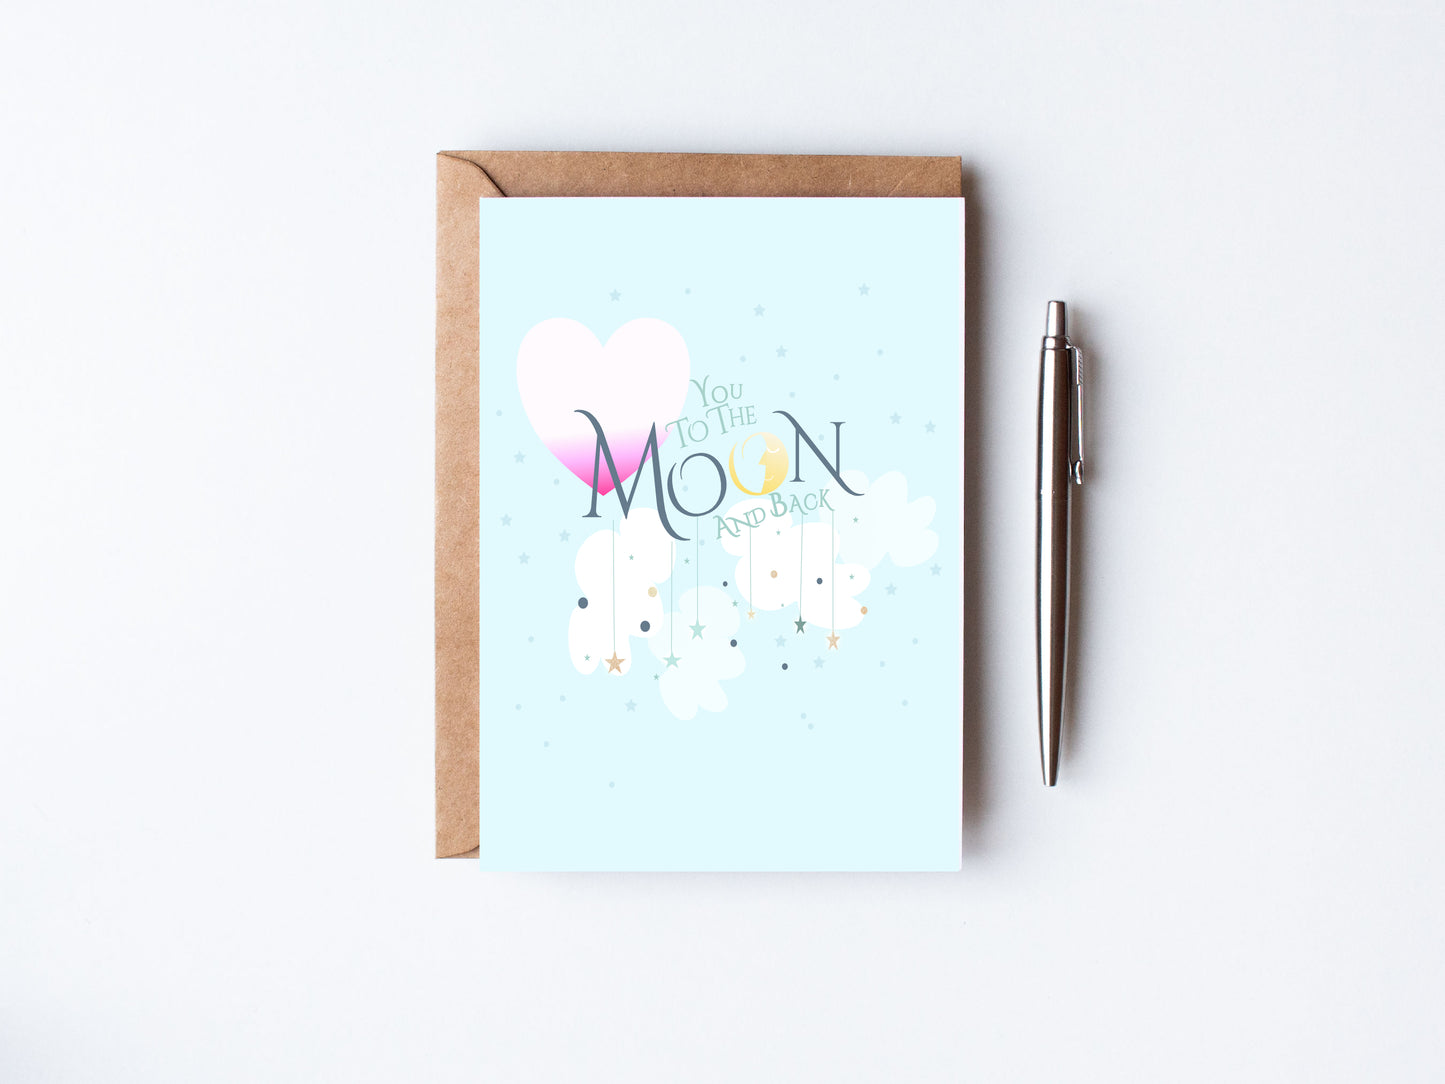 Pastel Blue Card - with Stars and HEart, the Moon - love yo uto the moon and back, polka dots - pastels